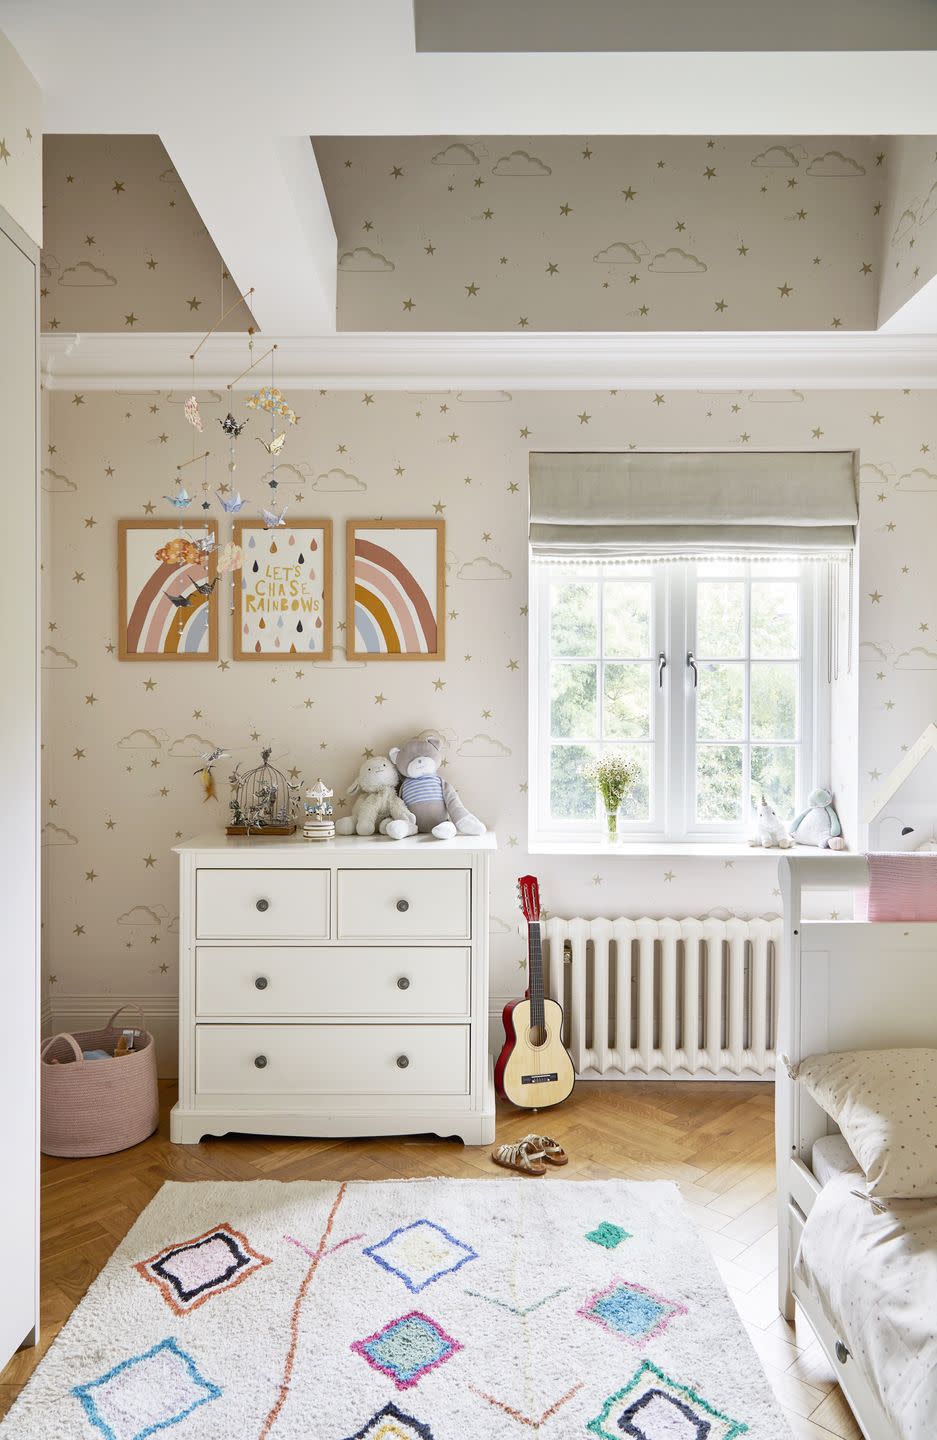 children's bedroom with starry wallpaper and rug